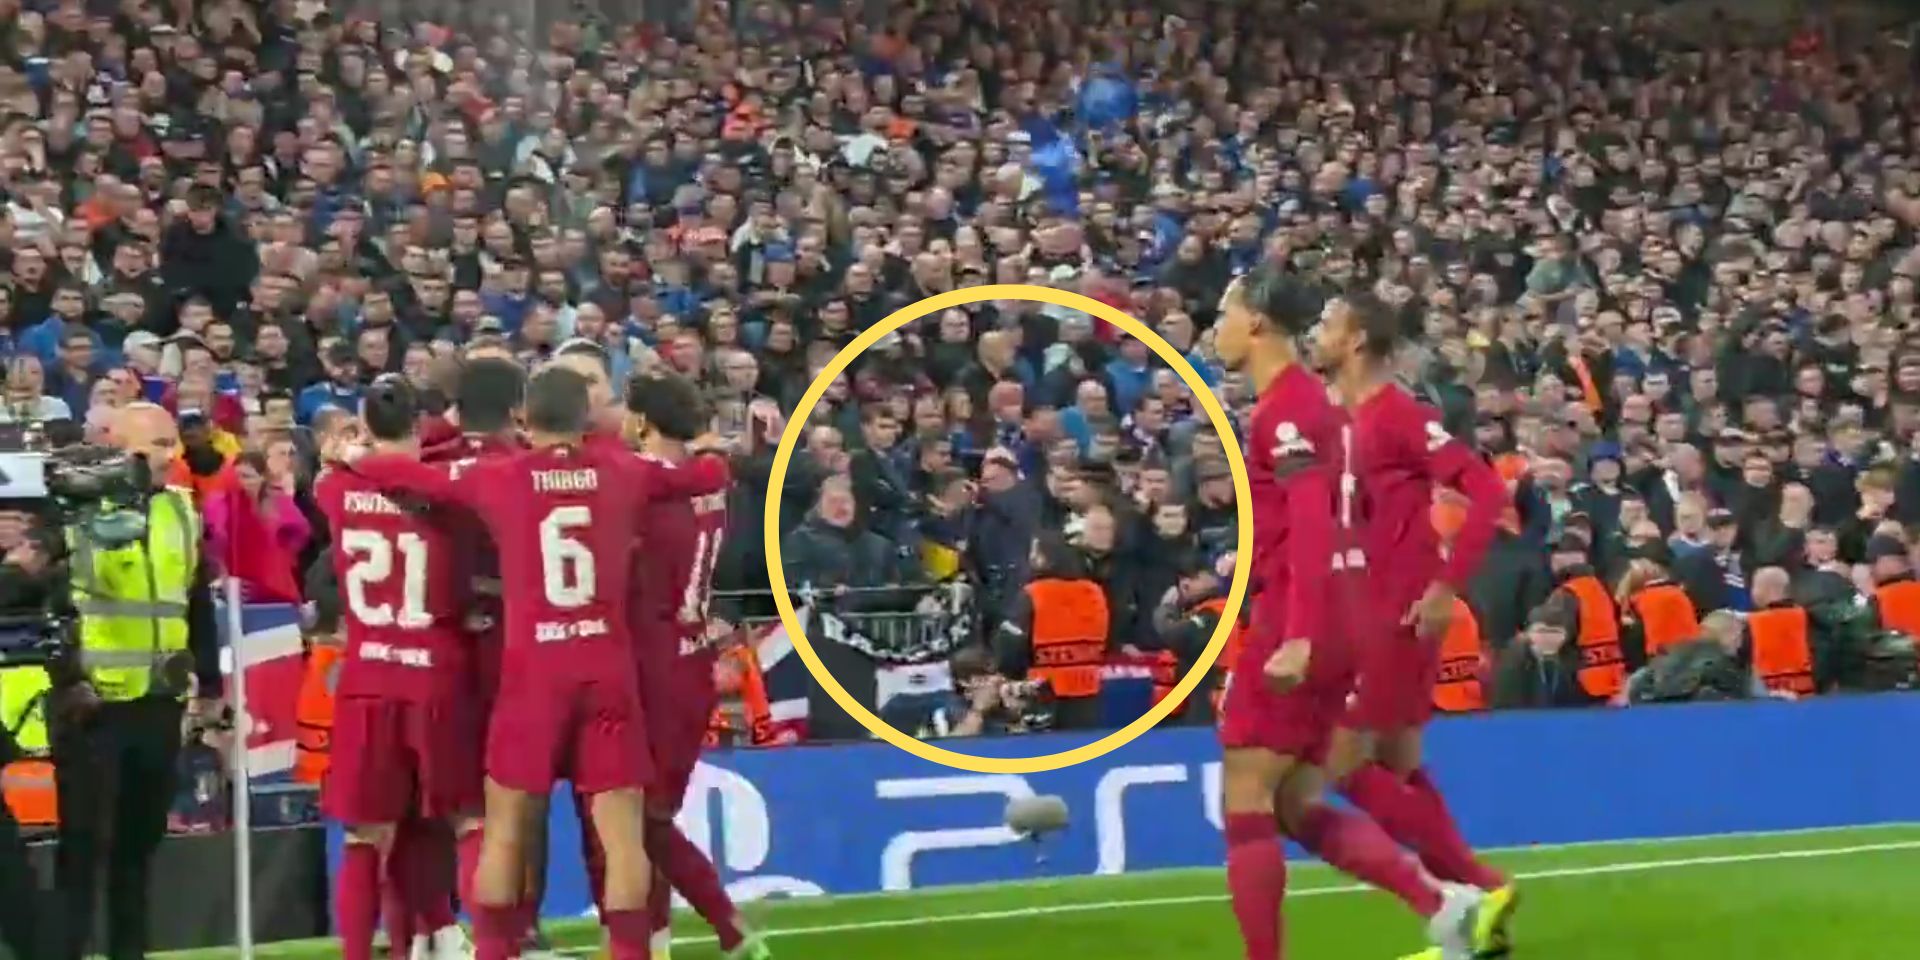 (Video) Weird away fan behaviour spotted as Rangers fan appears to ‘shoot’ Liverpool players with imaginary gun